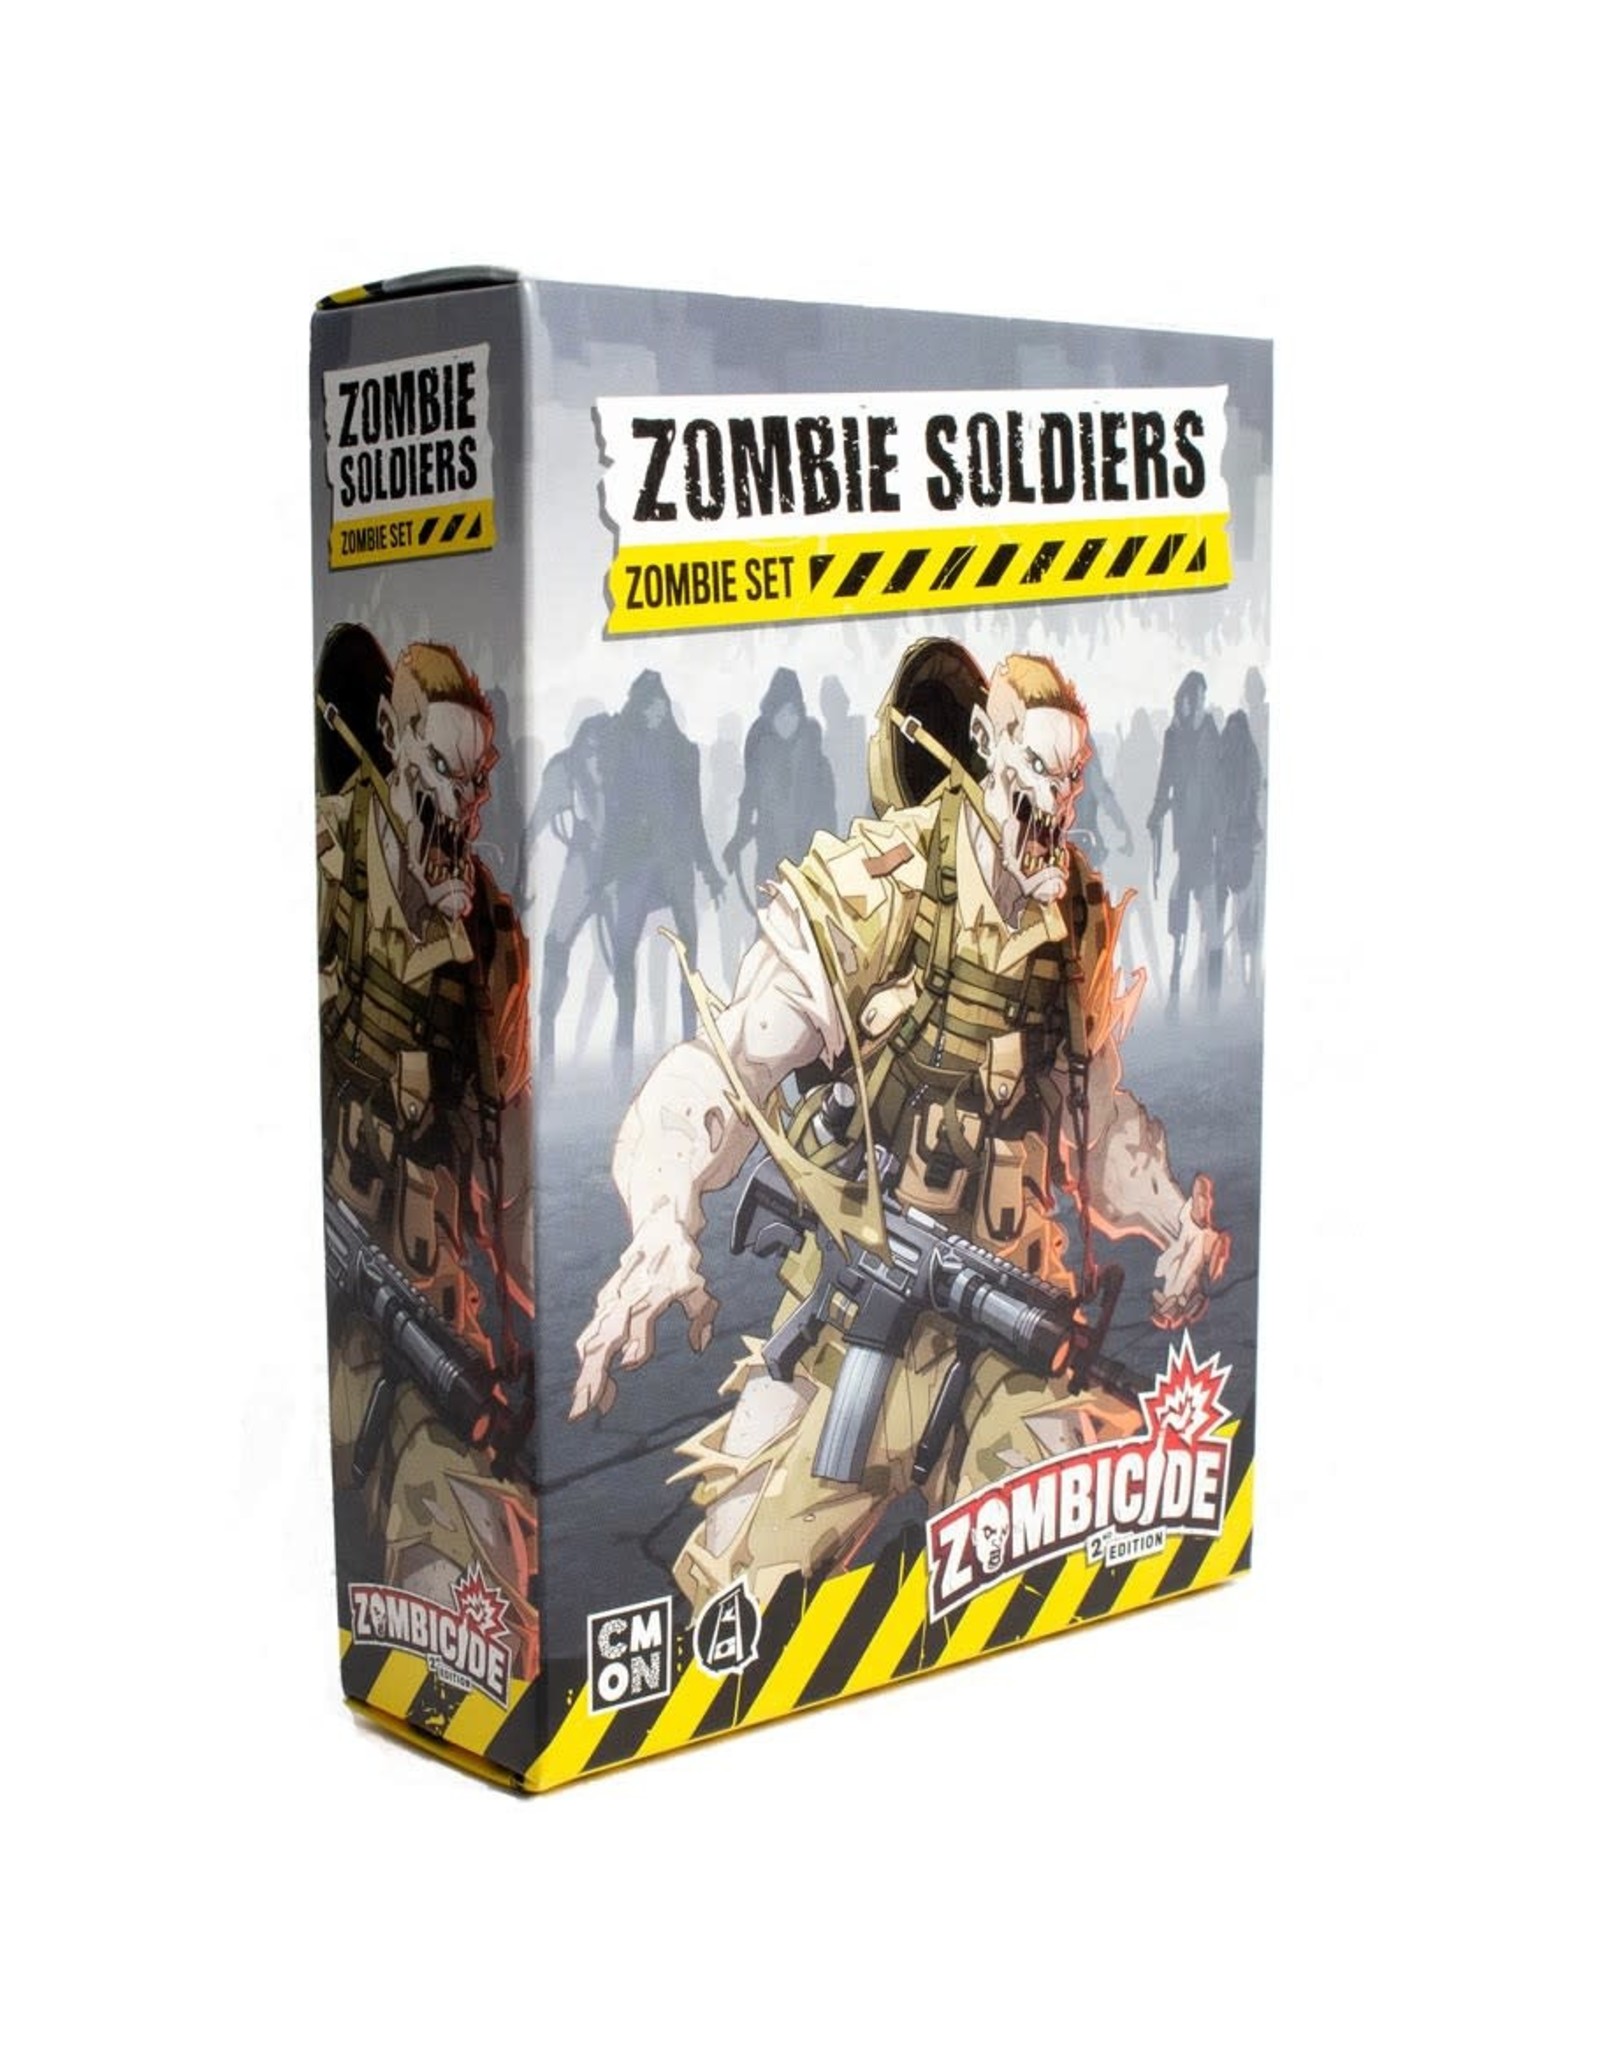 Cool Mini or Not Zombicide 2E: Zombie Soldiers Set